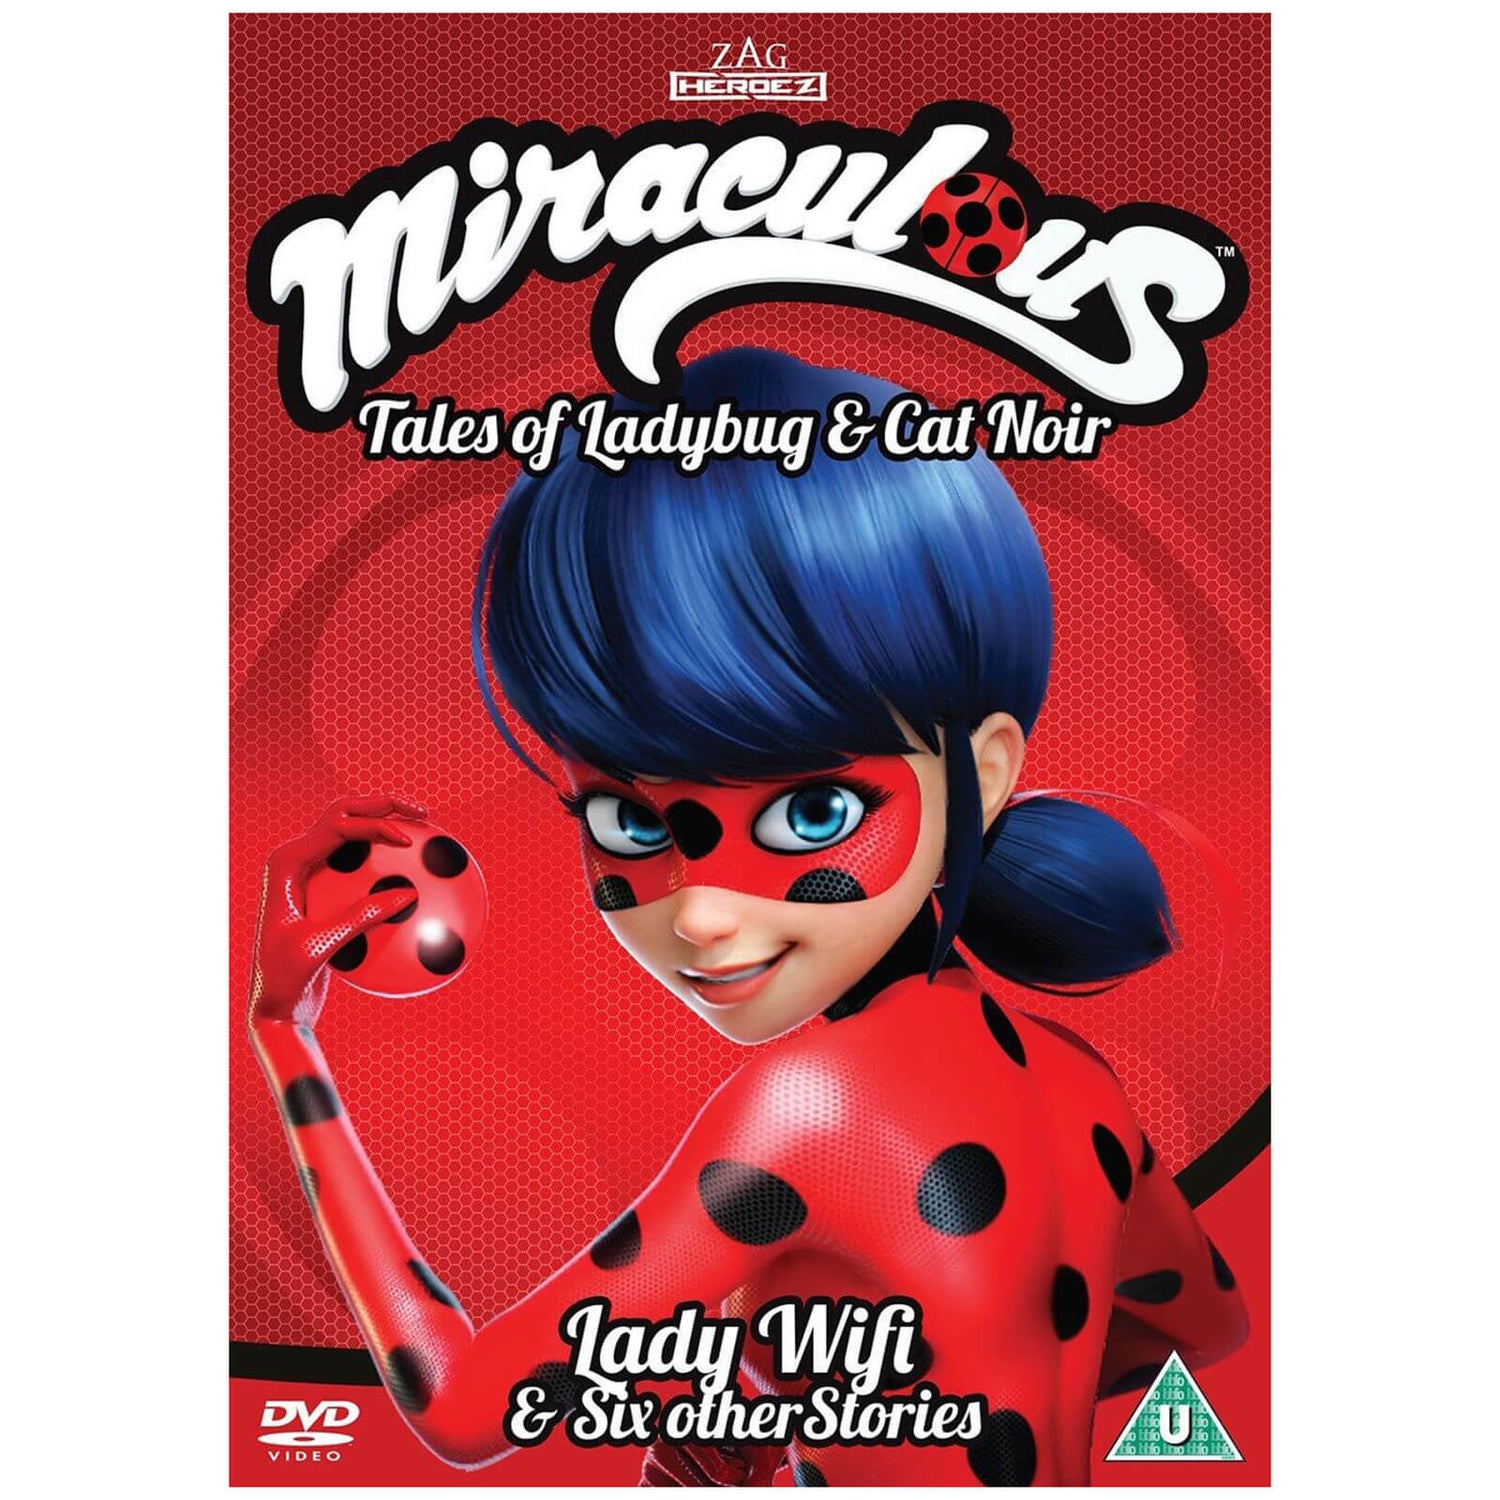 Miraculous: Tales of Ladybug and Cat Noir (Disney Channel) Vol 1